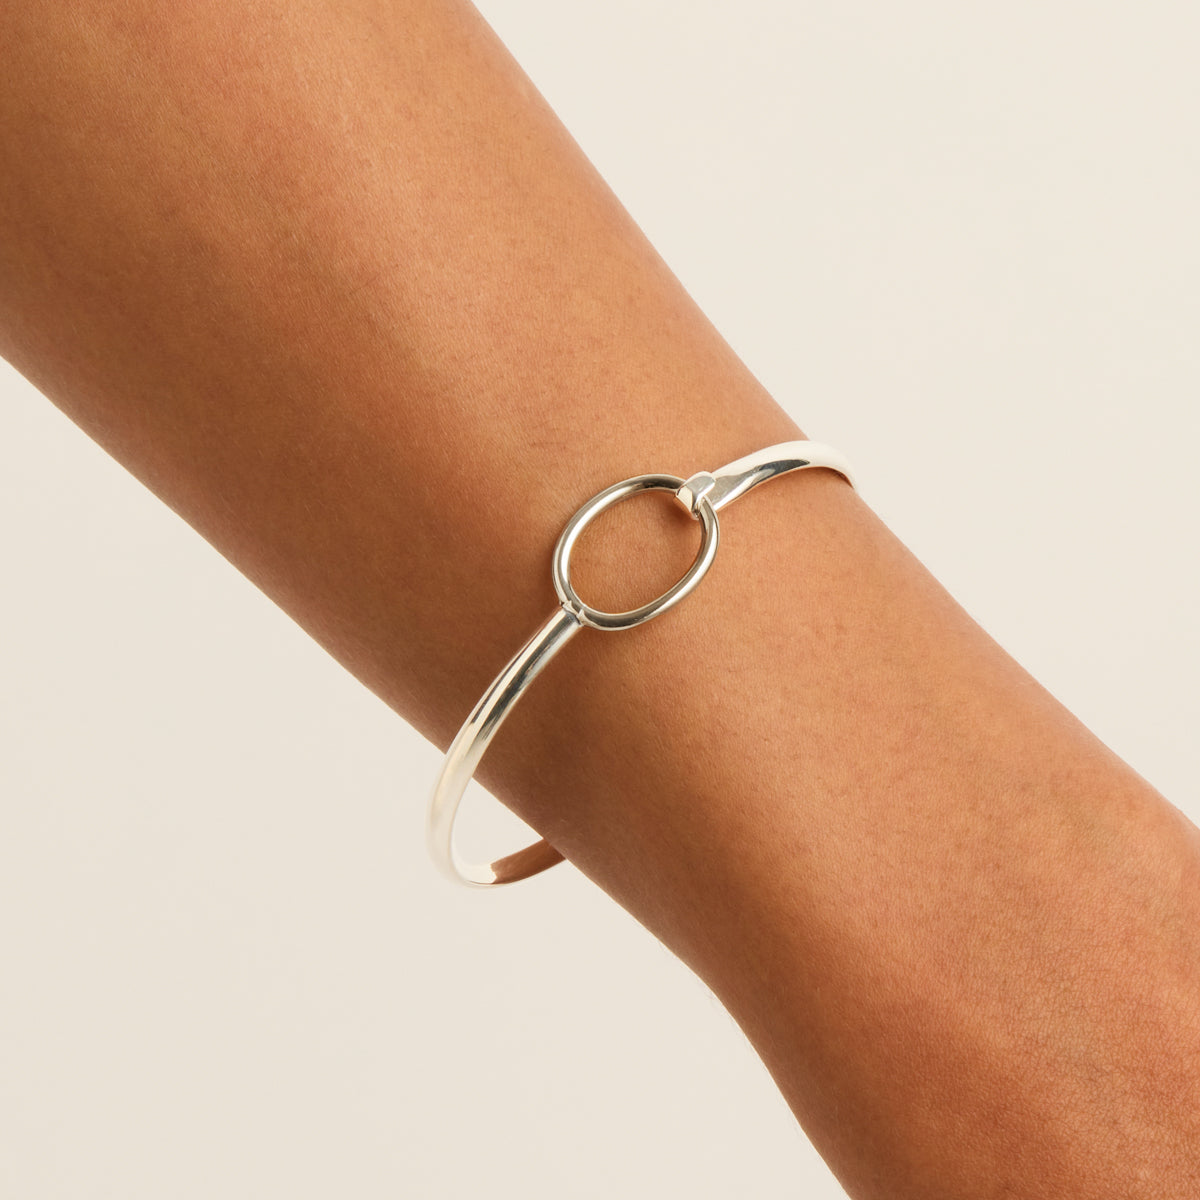 Silver oval ring tension Bangle